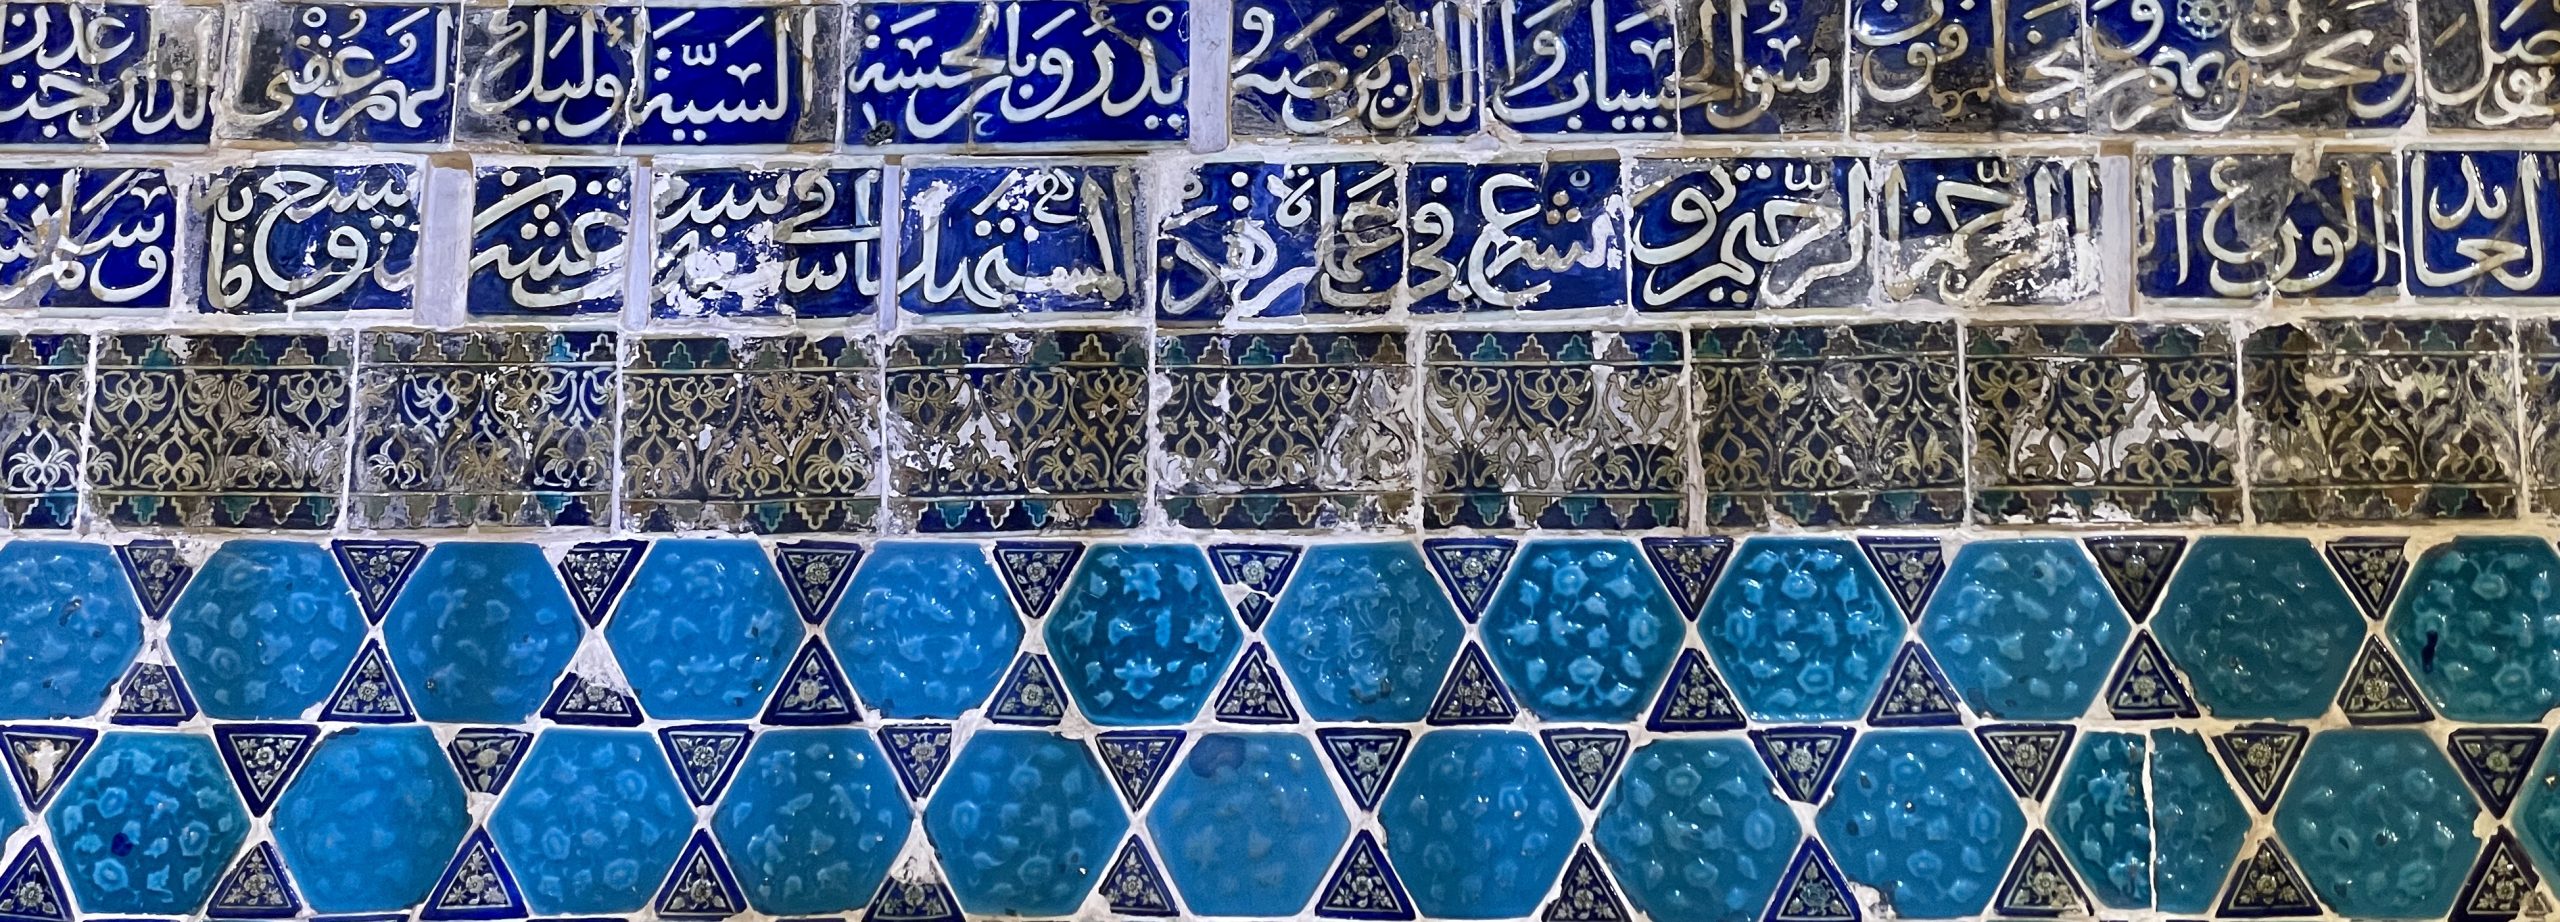 Blue tiles on display in the Iraq Museum.